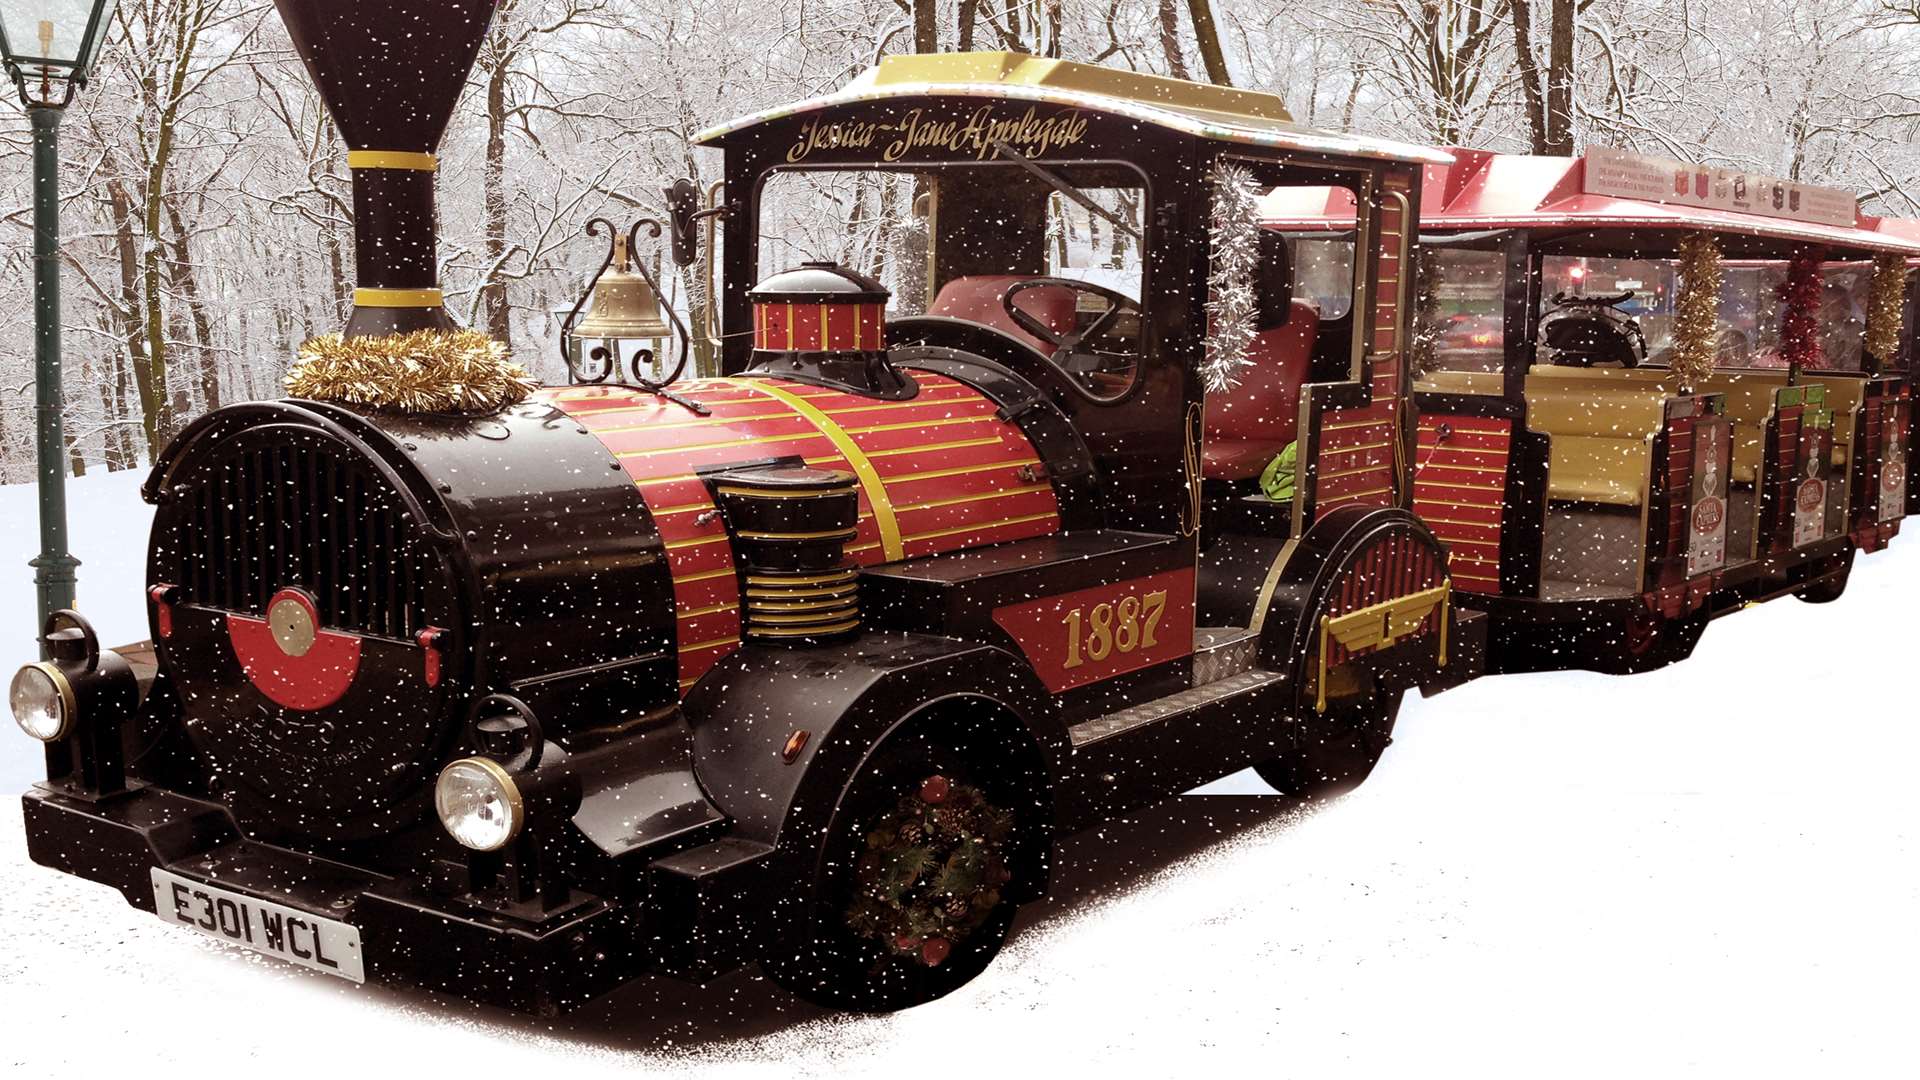 The Father Christmas World Express